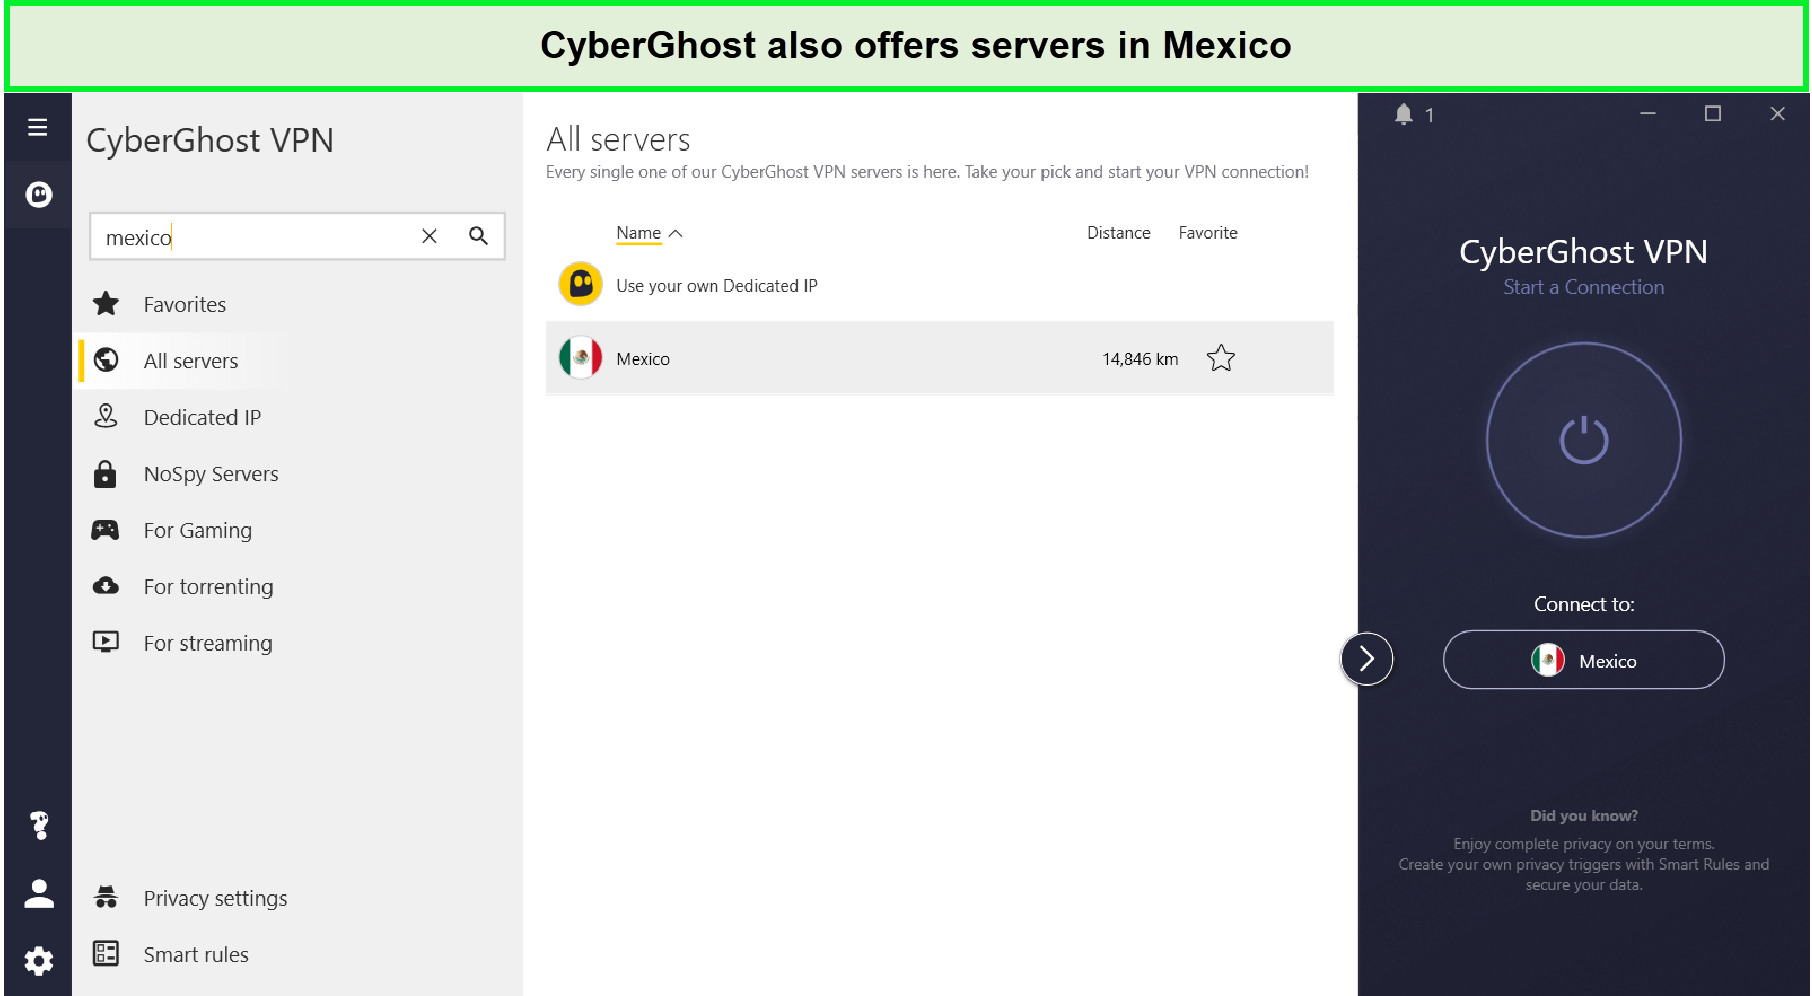 cyberghost-vpn-mexico-servers-For German Users